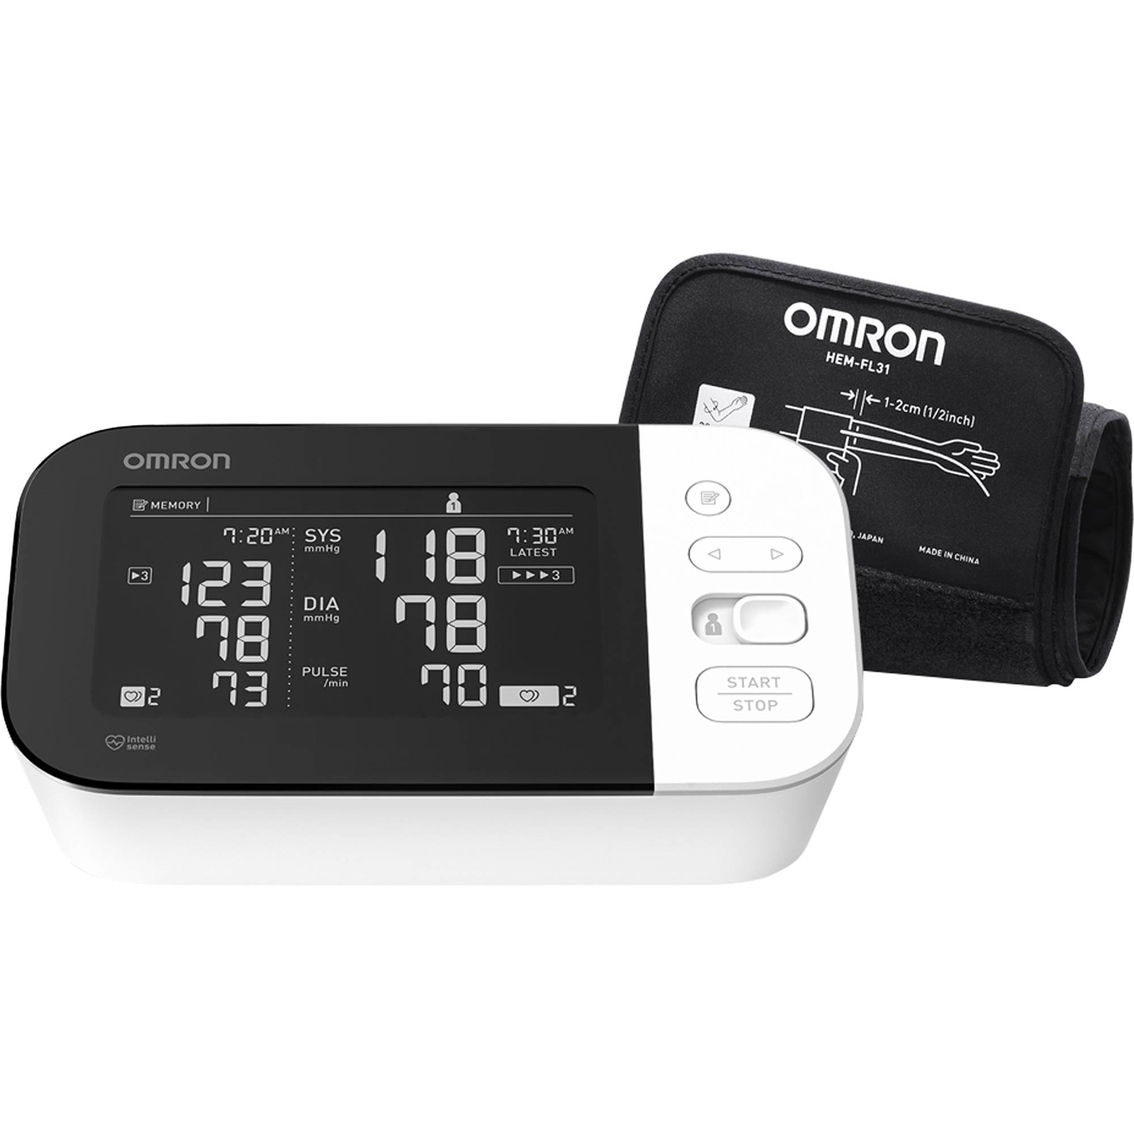  OMRON Gold Blood Pressure Monitor, Portable Wireless Wrist  Monitor, Digital Bluetooth Blood Pressure Machine, Stores Up To 200  Readings for Two Users (100 each) : Health & Household